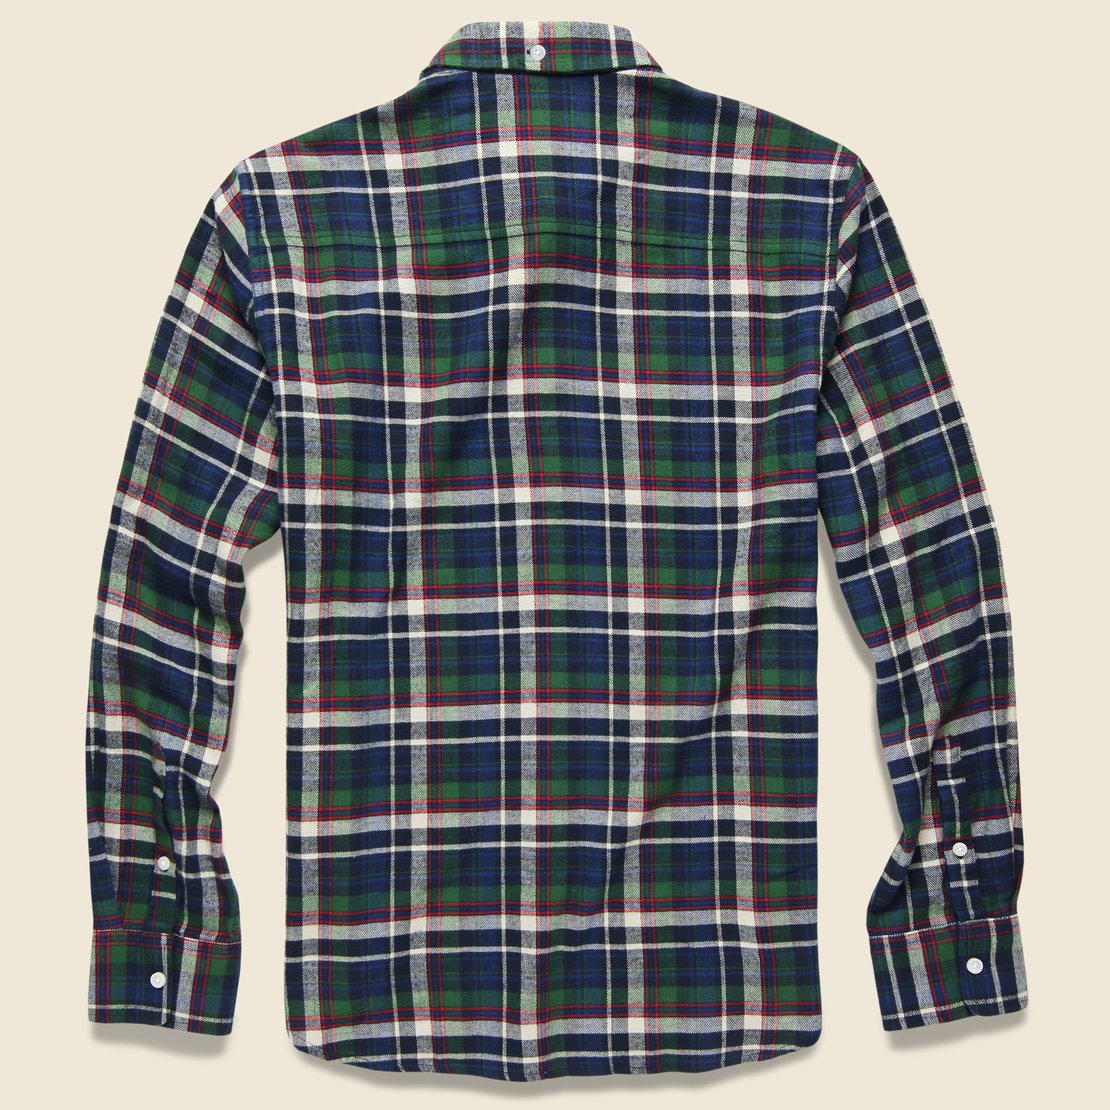 Barrhead Flannel - Navy - Penfield - STAG Provisions - Tops - L/S Woven - Plaid